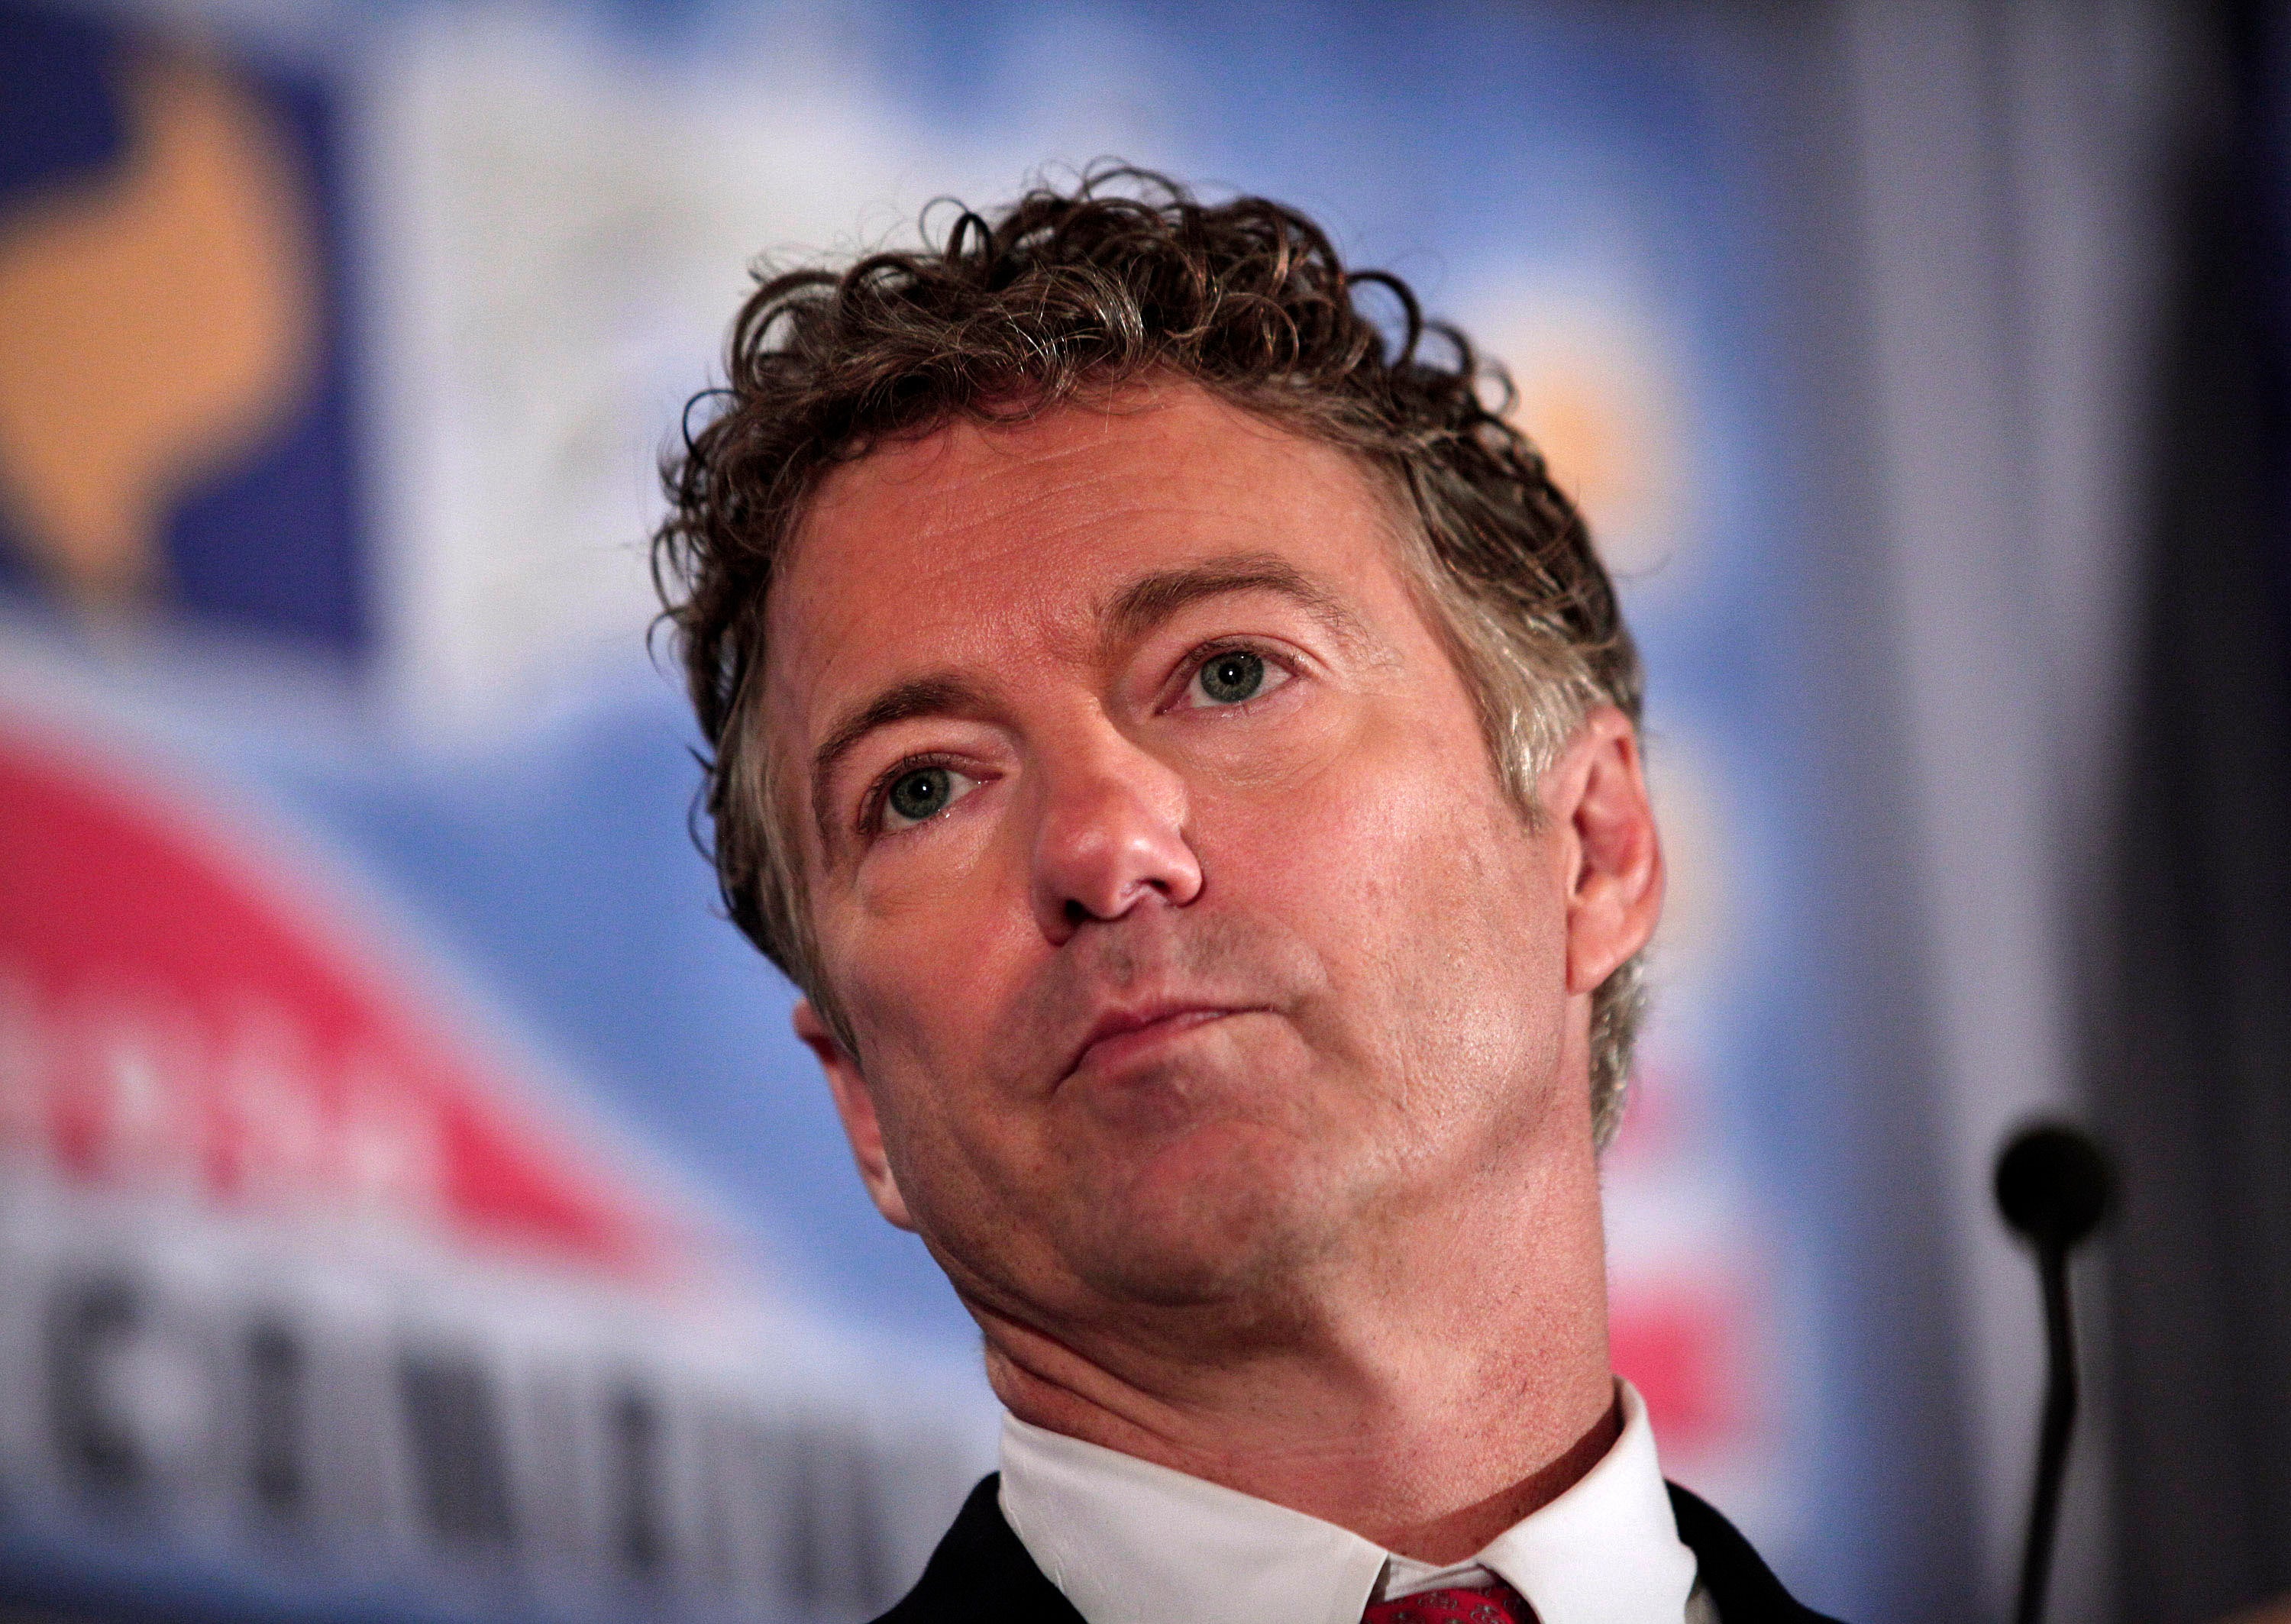 Senator Rand Paul said calling same-sex unions marriage "offends" him and others